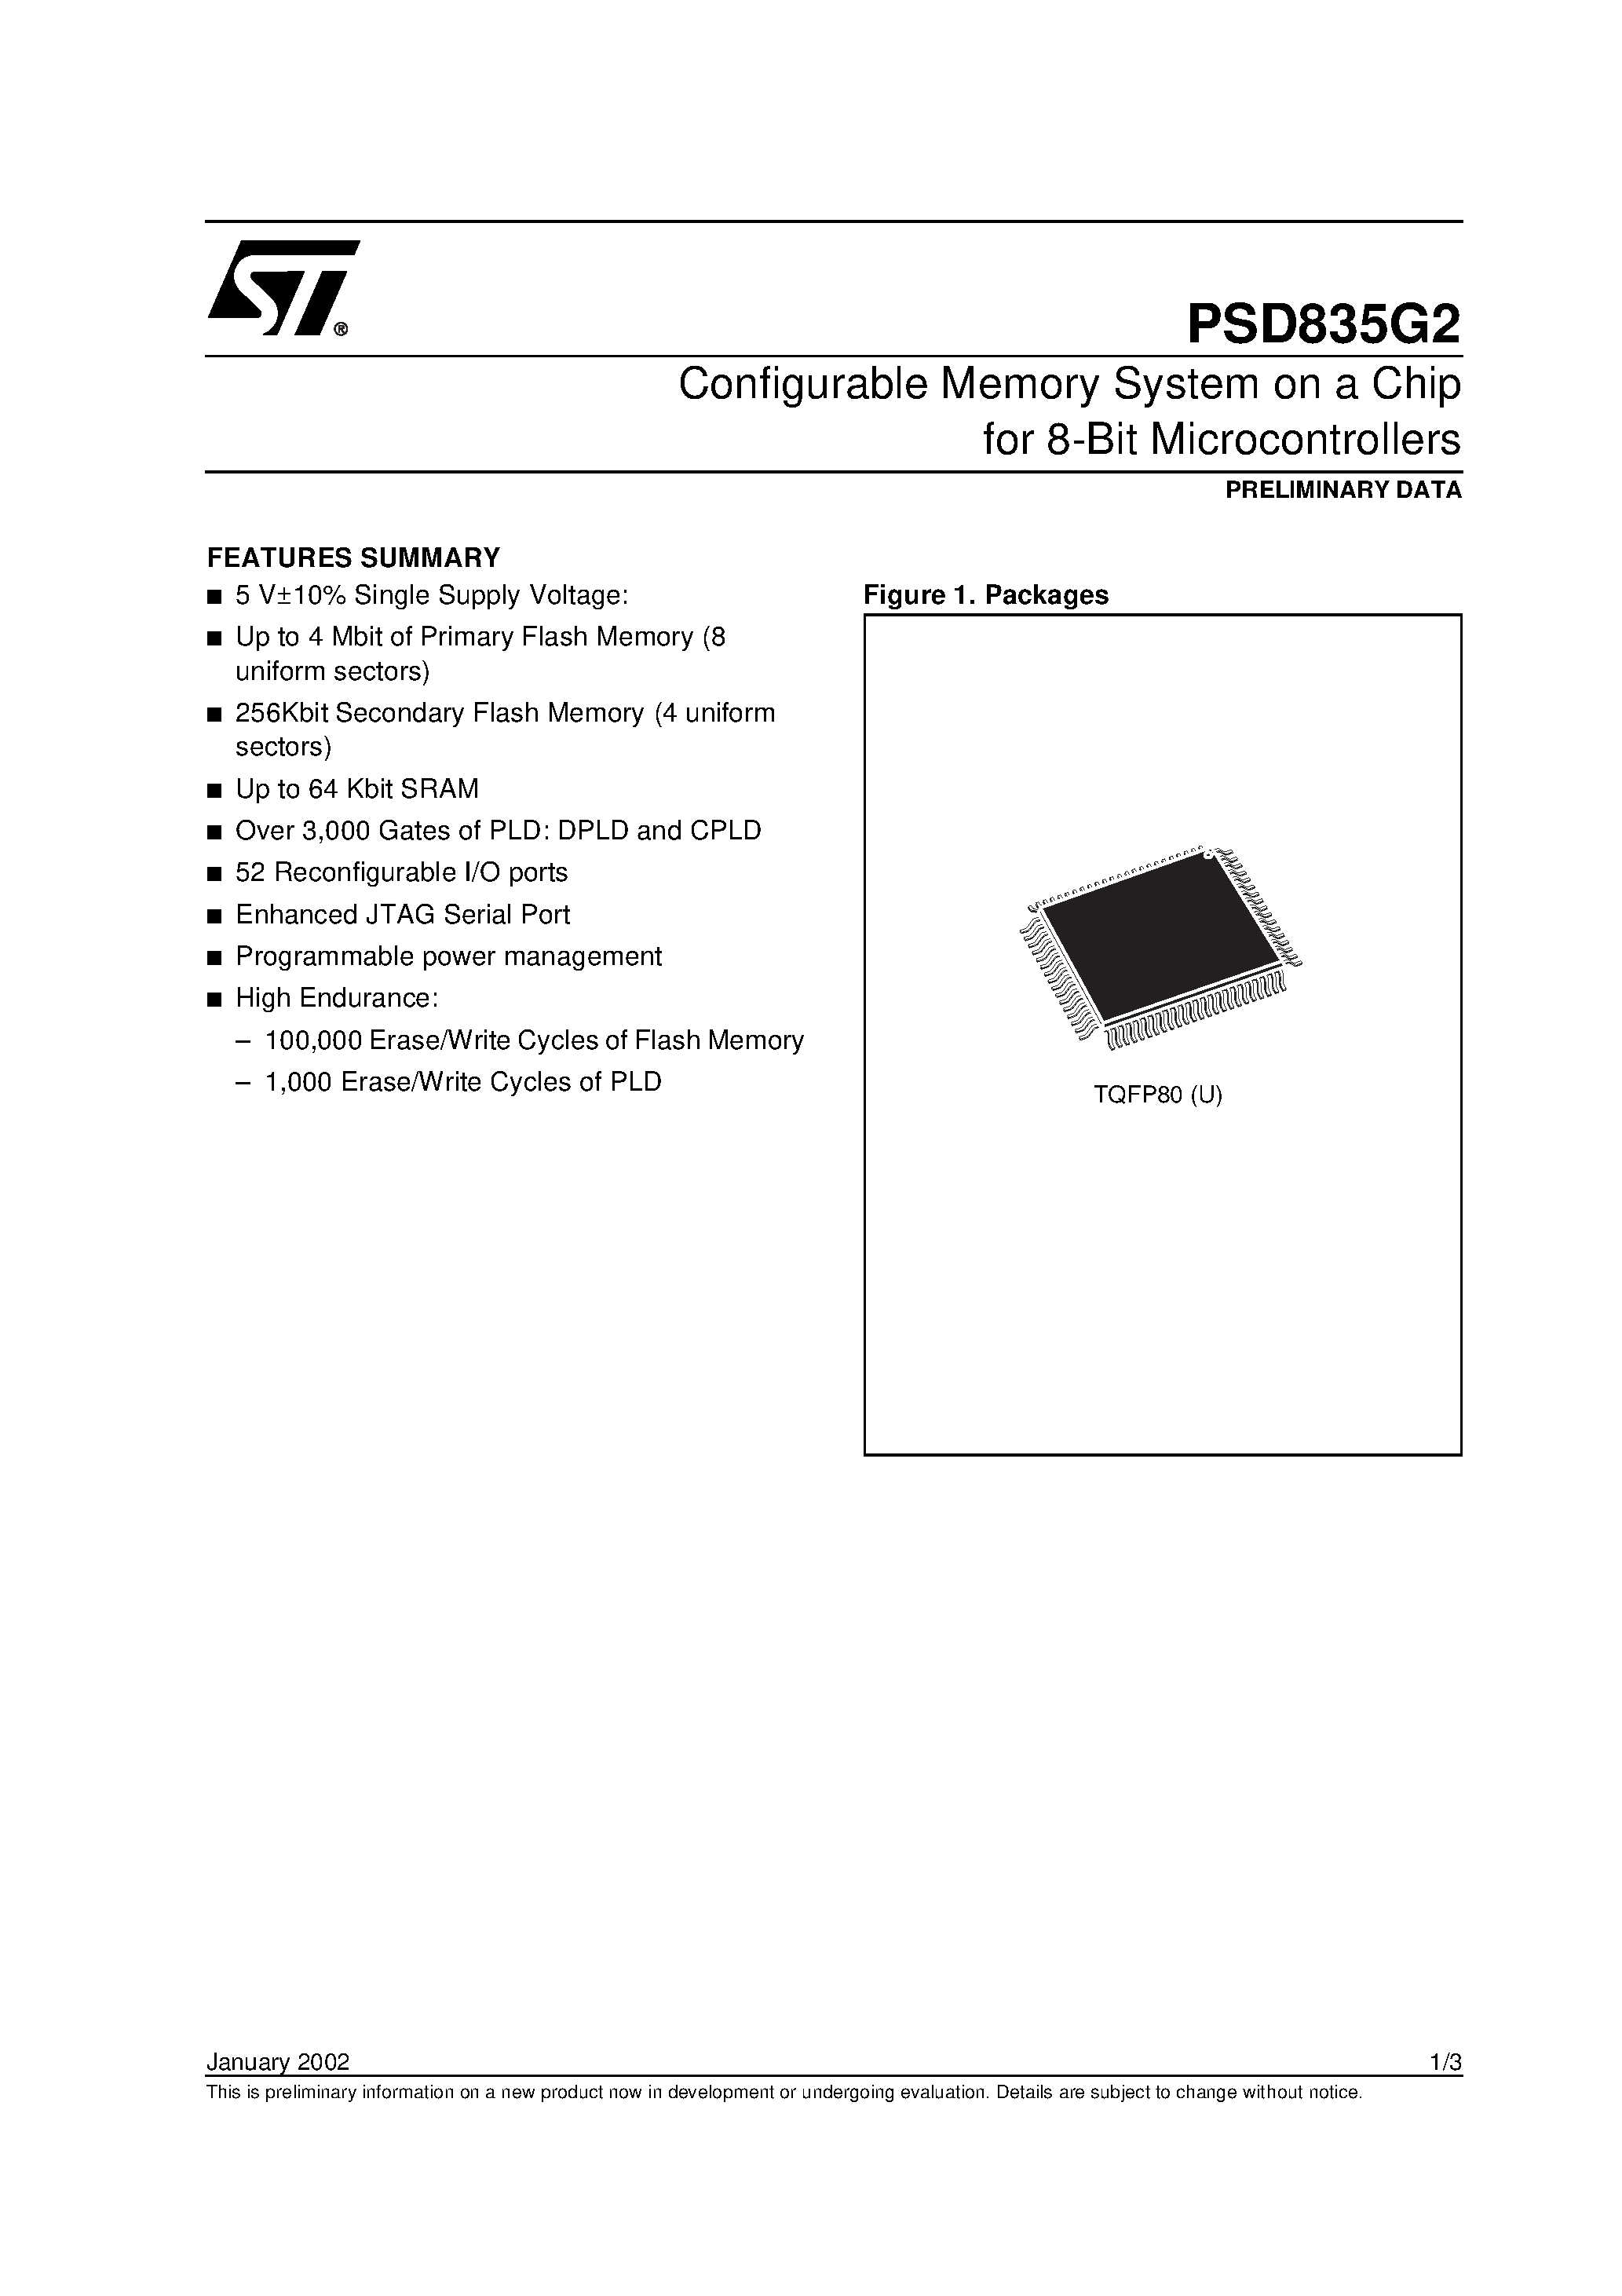 Datasheet PSD835F1-A-20M - Configurable Memory System on a Chip for 8-Bit Microcontrollers page 1